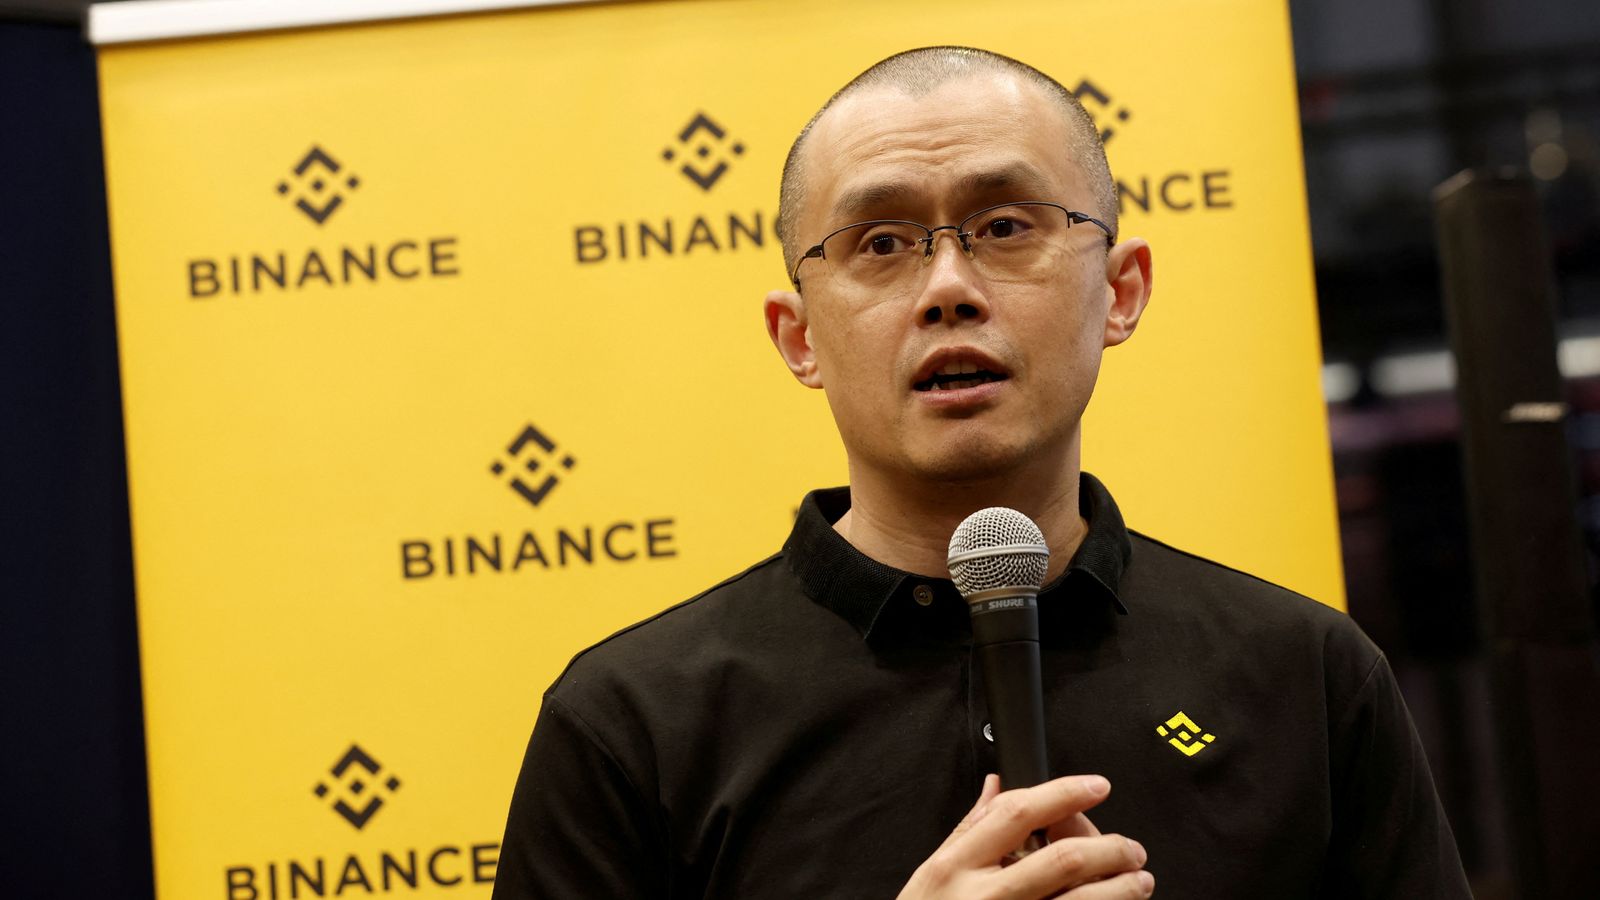 Changpeng Zhao: Former boss of world’s largest crypto alternate Binance jailed for permitting cash laundering